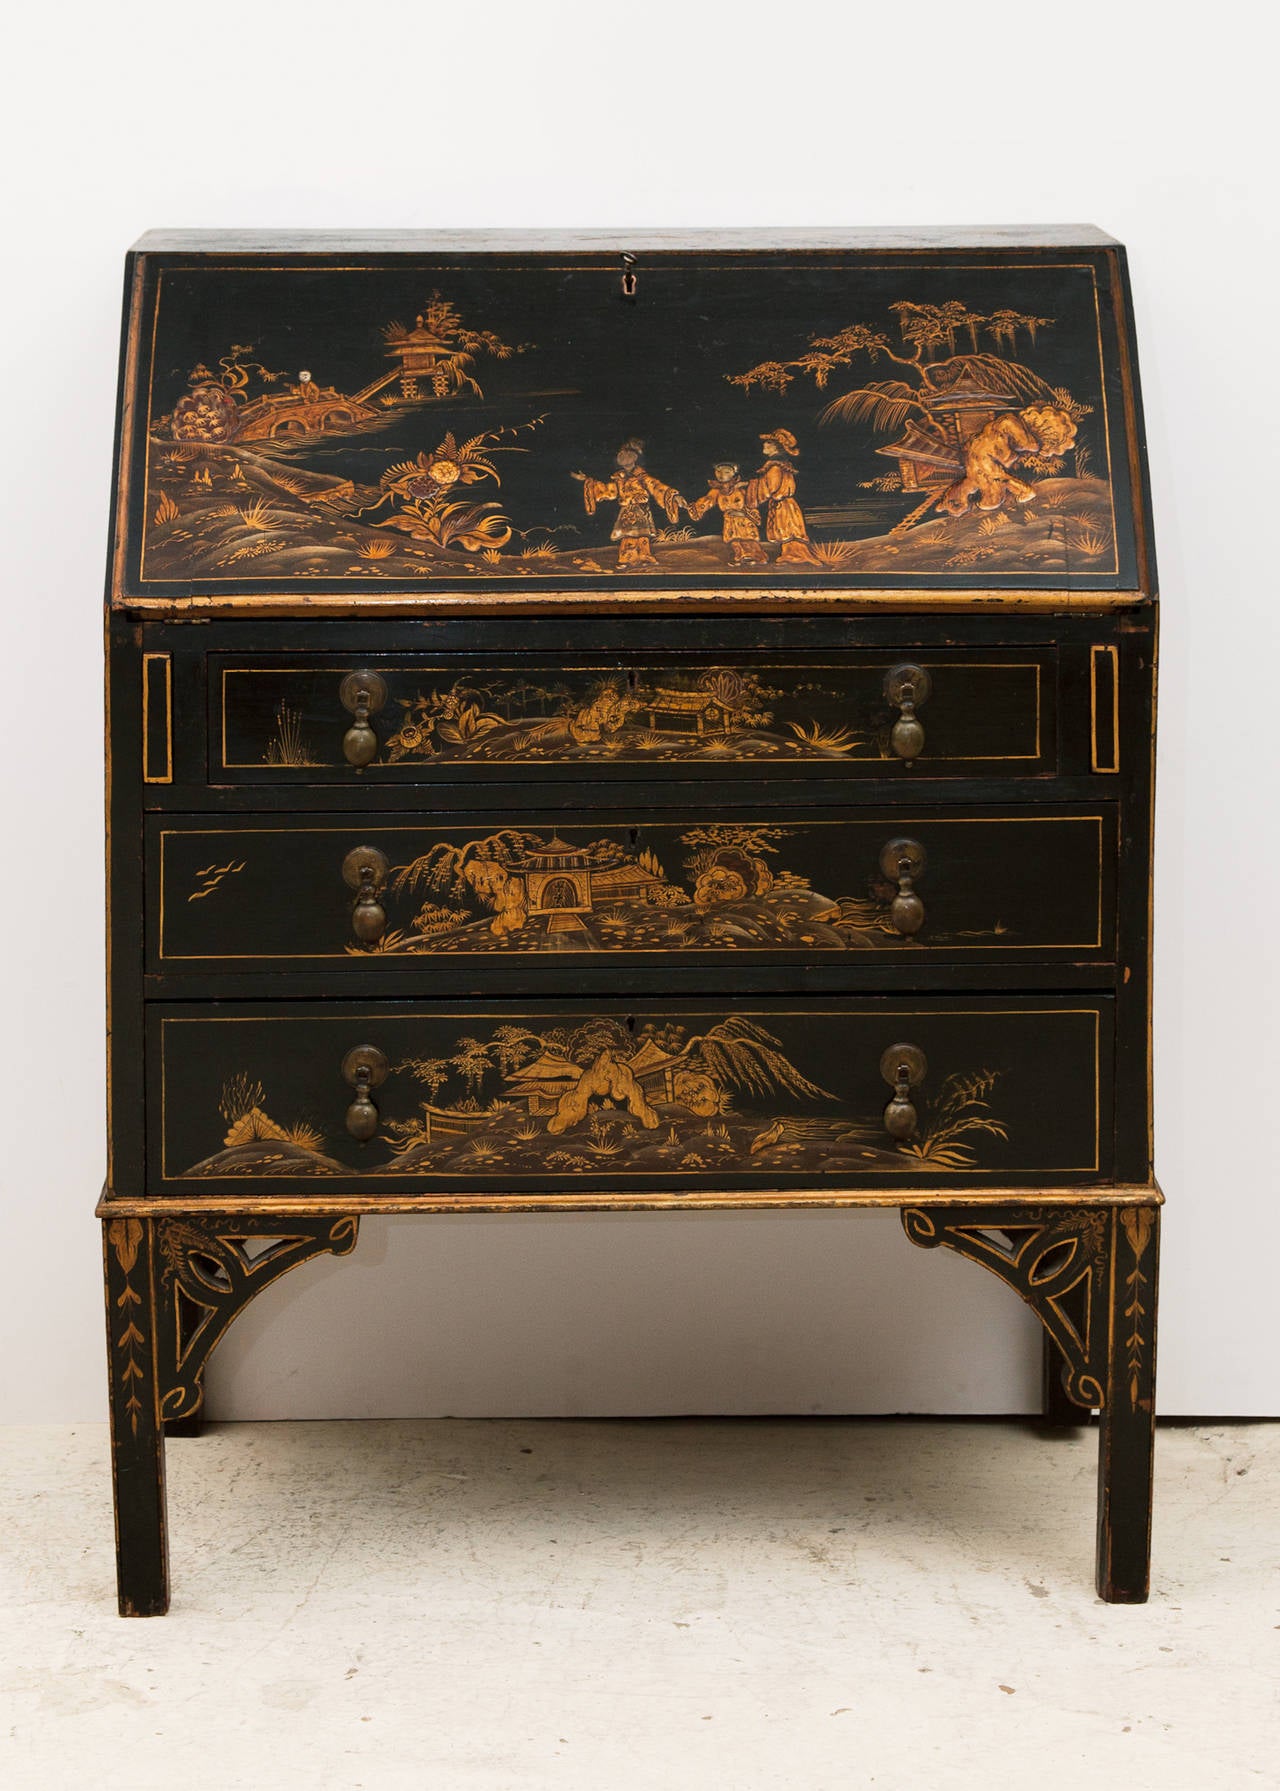 Black lacquer with gold and yellow coloured decoration in slight relief of Chinese landscapes and people. 
Three long drawers with original brass drop handles, supported on four bracket feet.
England, c.1860.